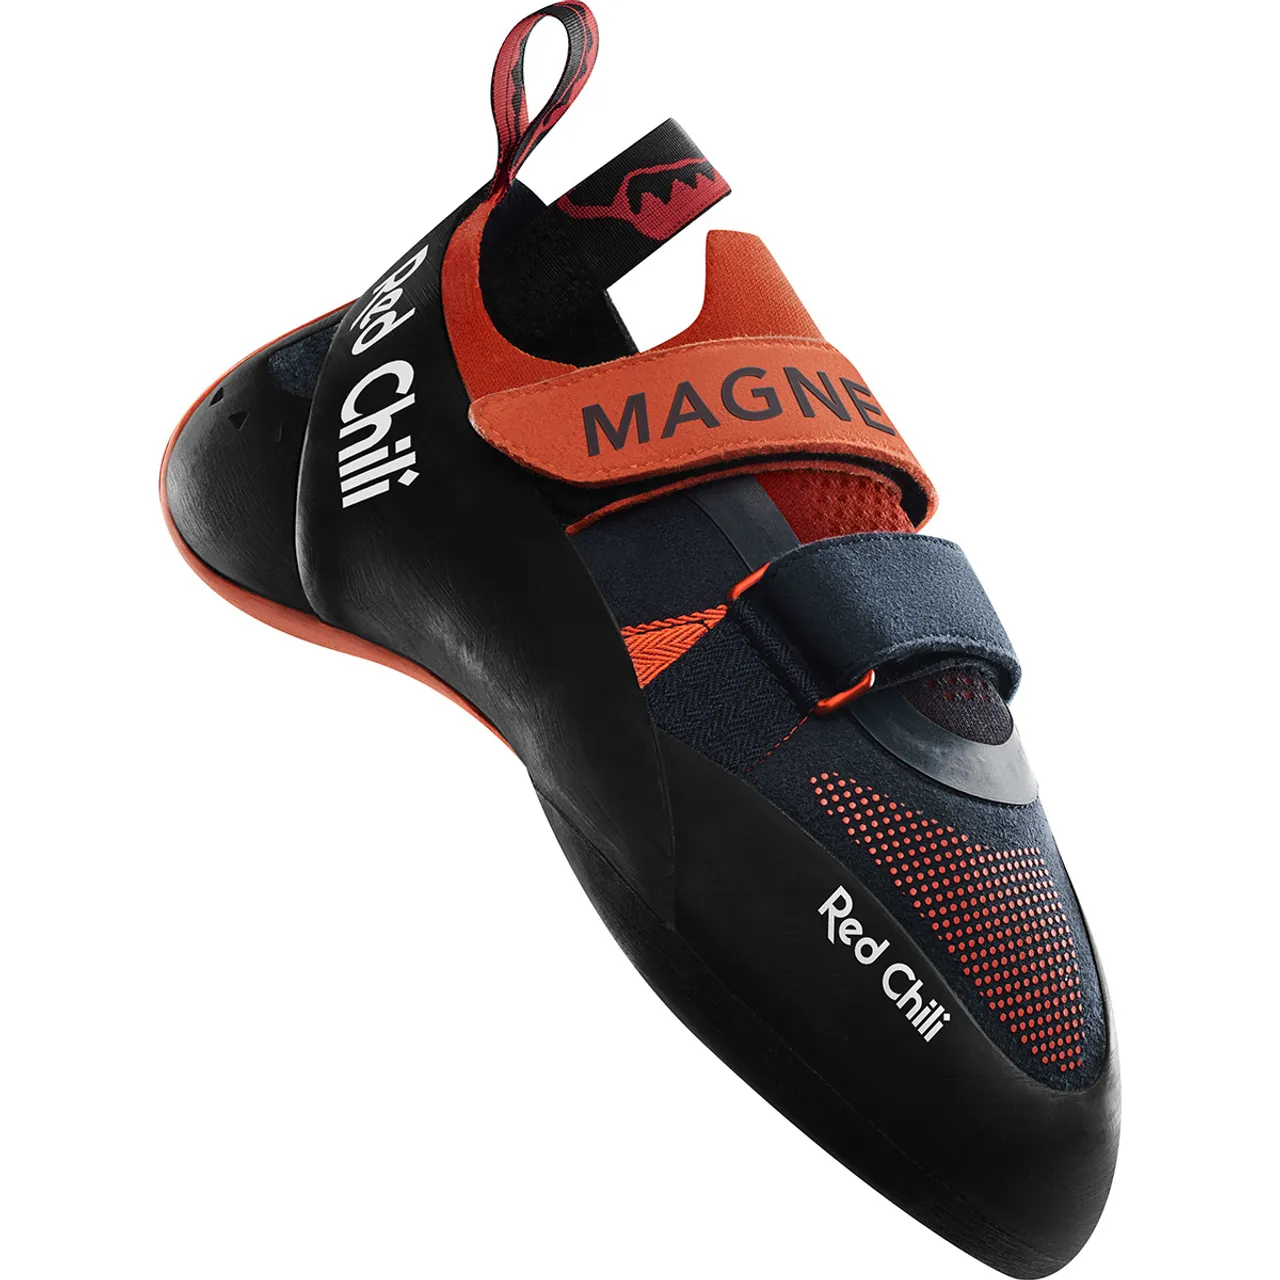 Red Chili Magnet Kletterschuhe